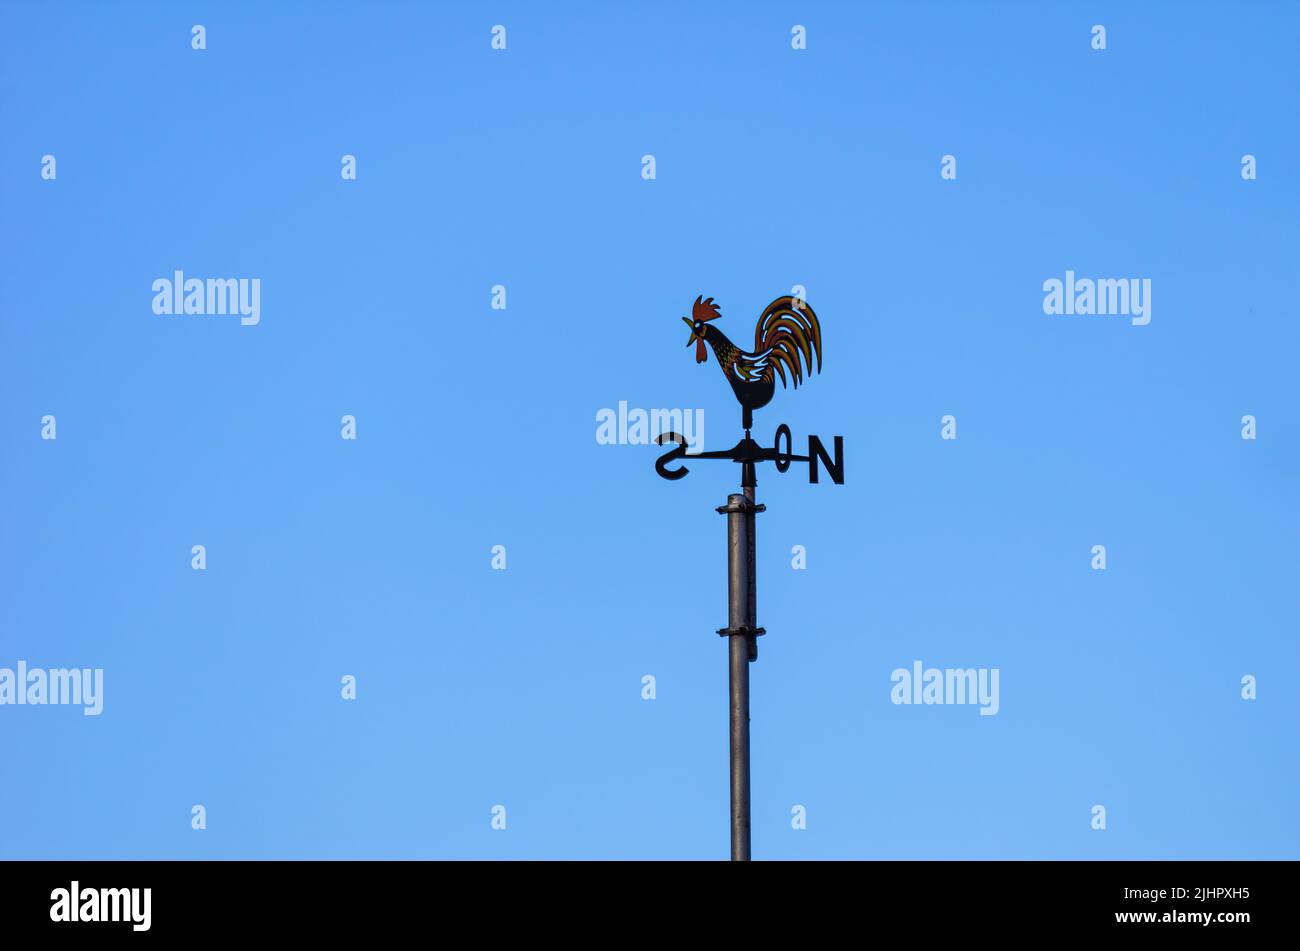 Weather vane or weathercock with wind direction indicator in the form of a compass rose on a roof against a blue sky. Stock Photo